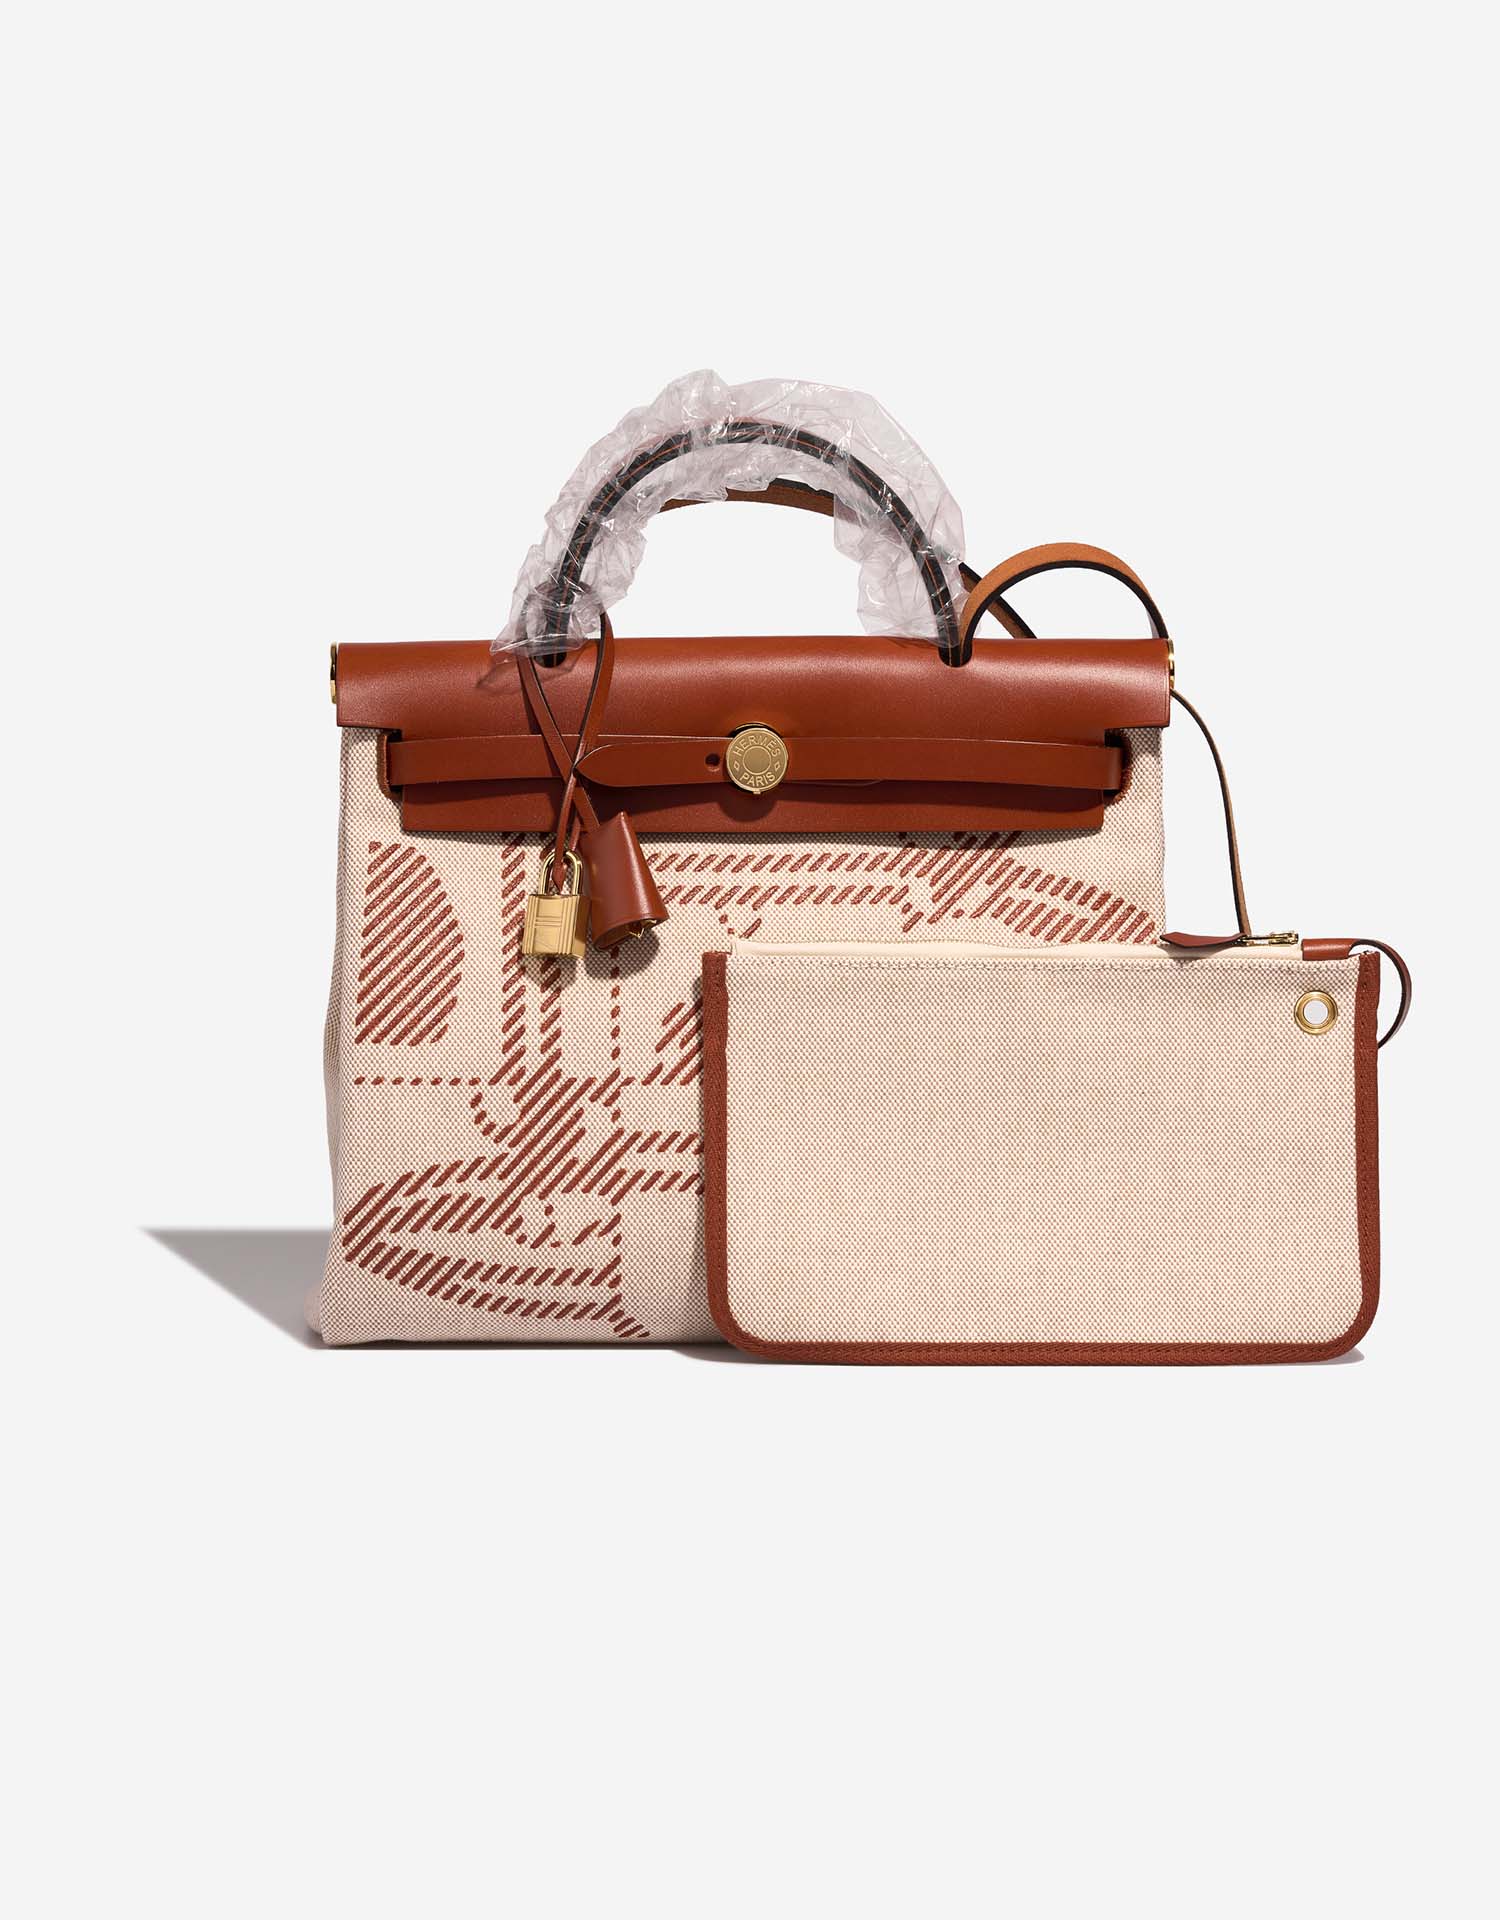 Hermes Rouge H/Cuivre Canvas and Leather Herbag Zip 39 Bag at